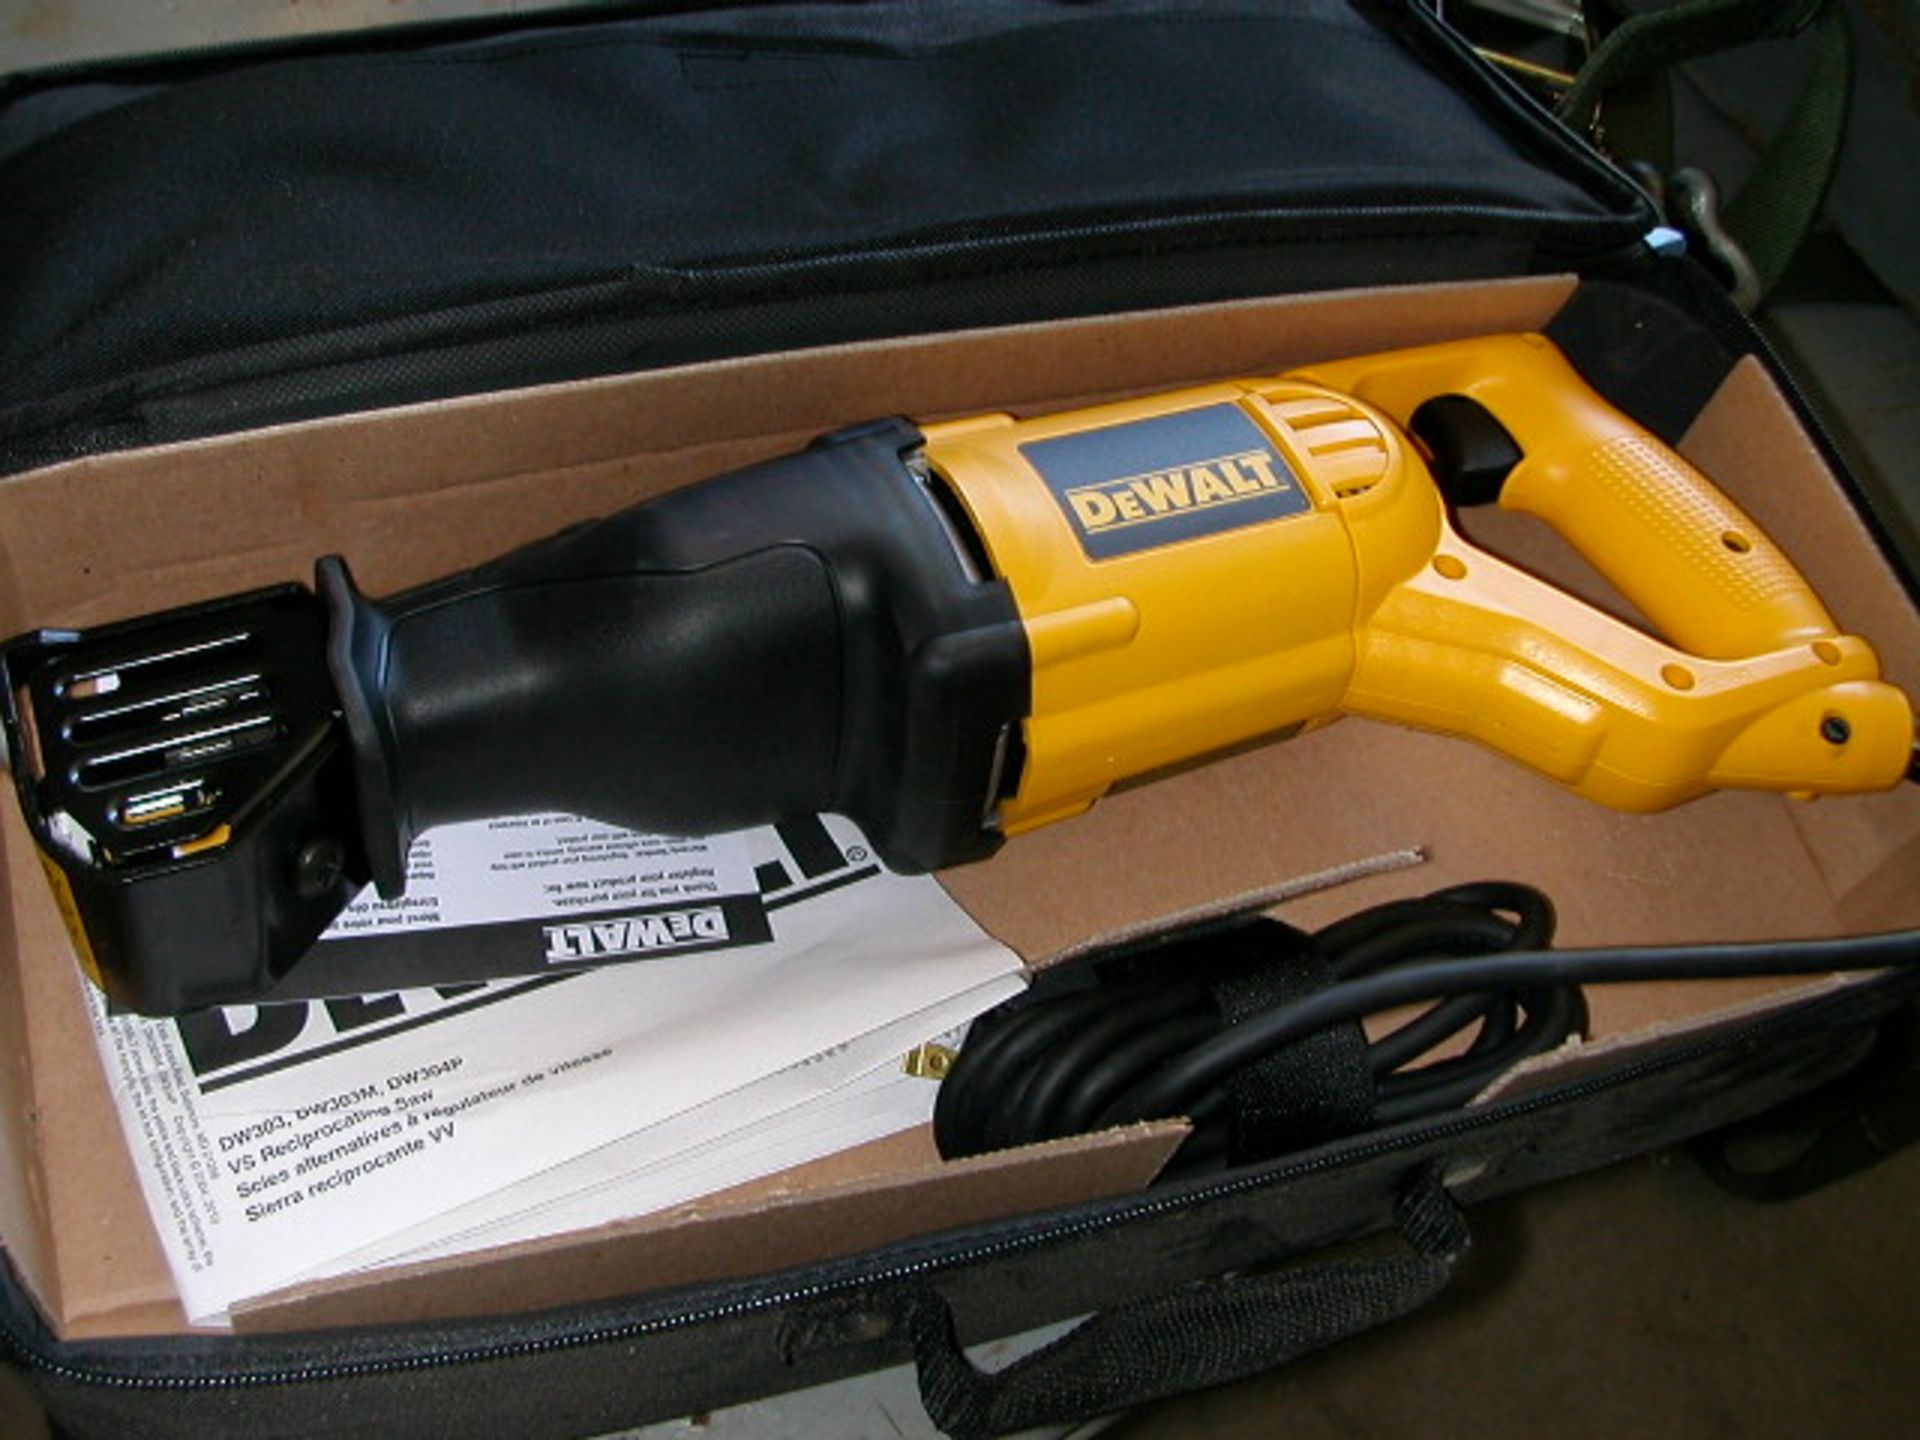 NEW - Electric Dewalt Reciprocating Saw in Nylon Bag (Bag is Smudged on Outside)